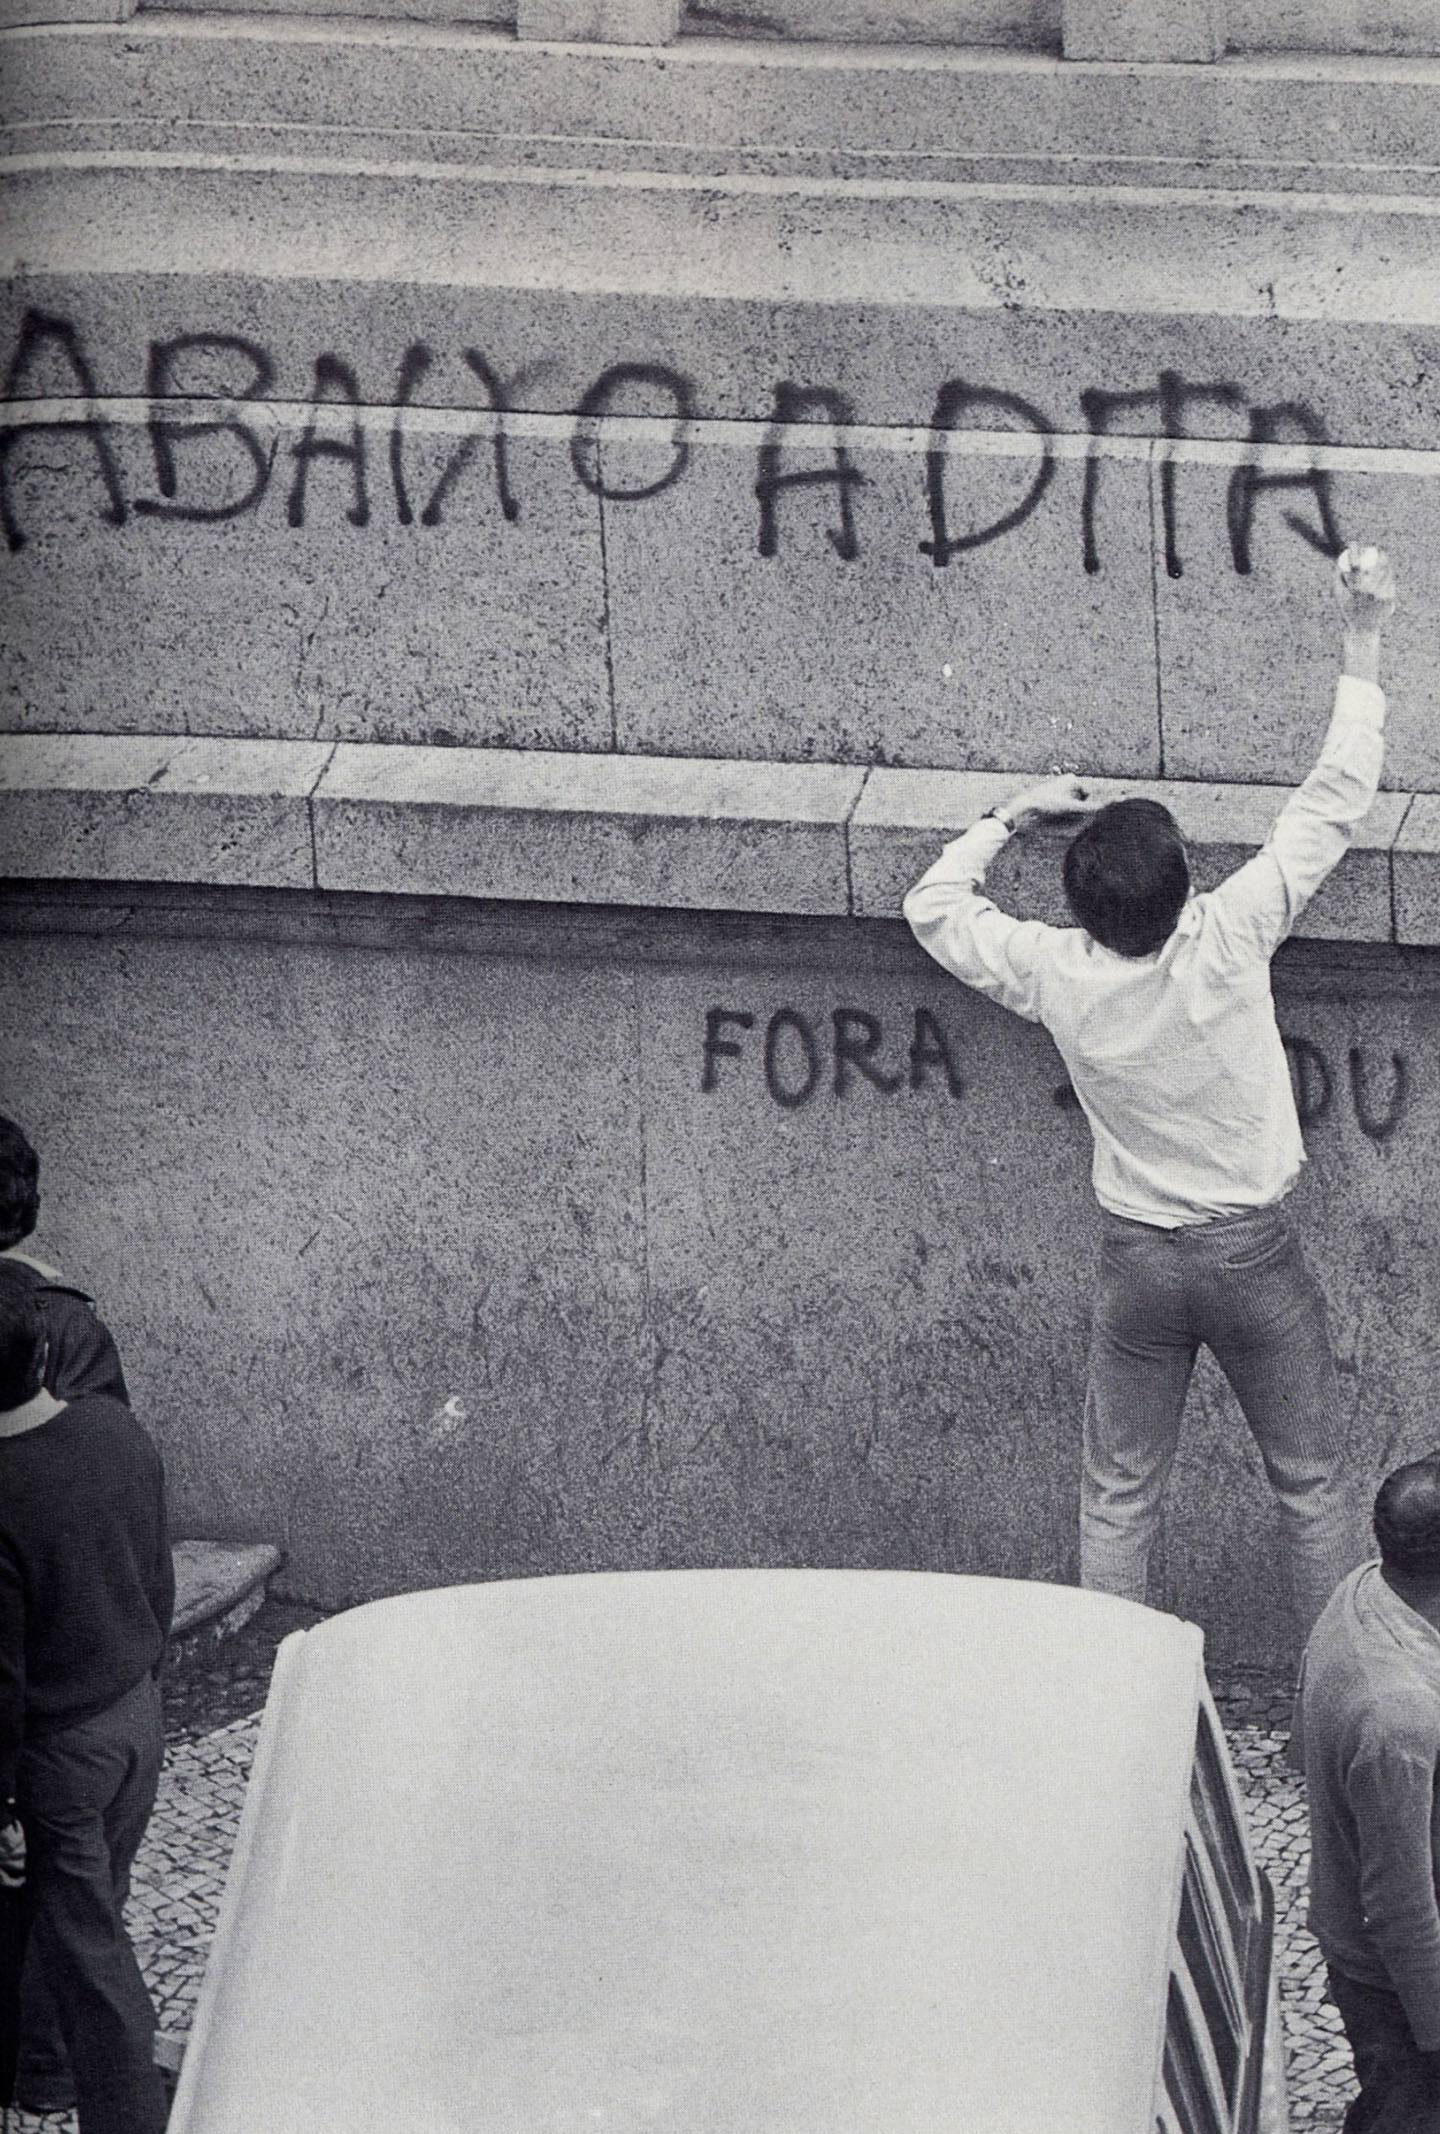 Democratizing information: Student protesting against the military dictatorship in 1968 in Rio de Janeiro. Demand for access to historical information is high: 50,000 readers visited the new document site in its first week.